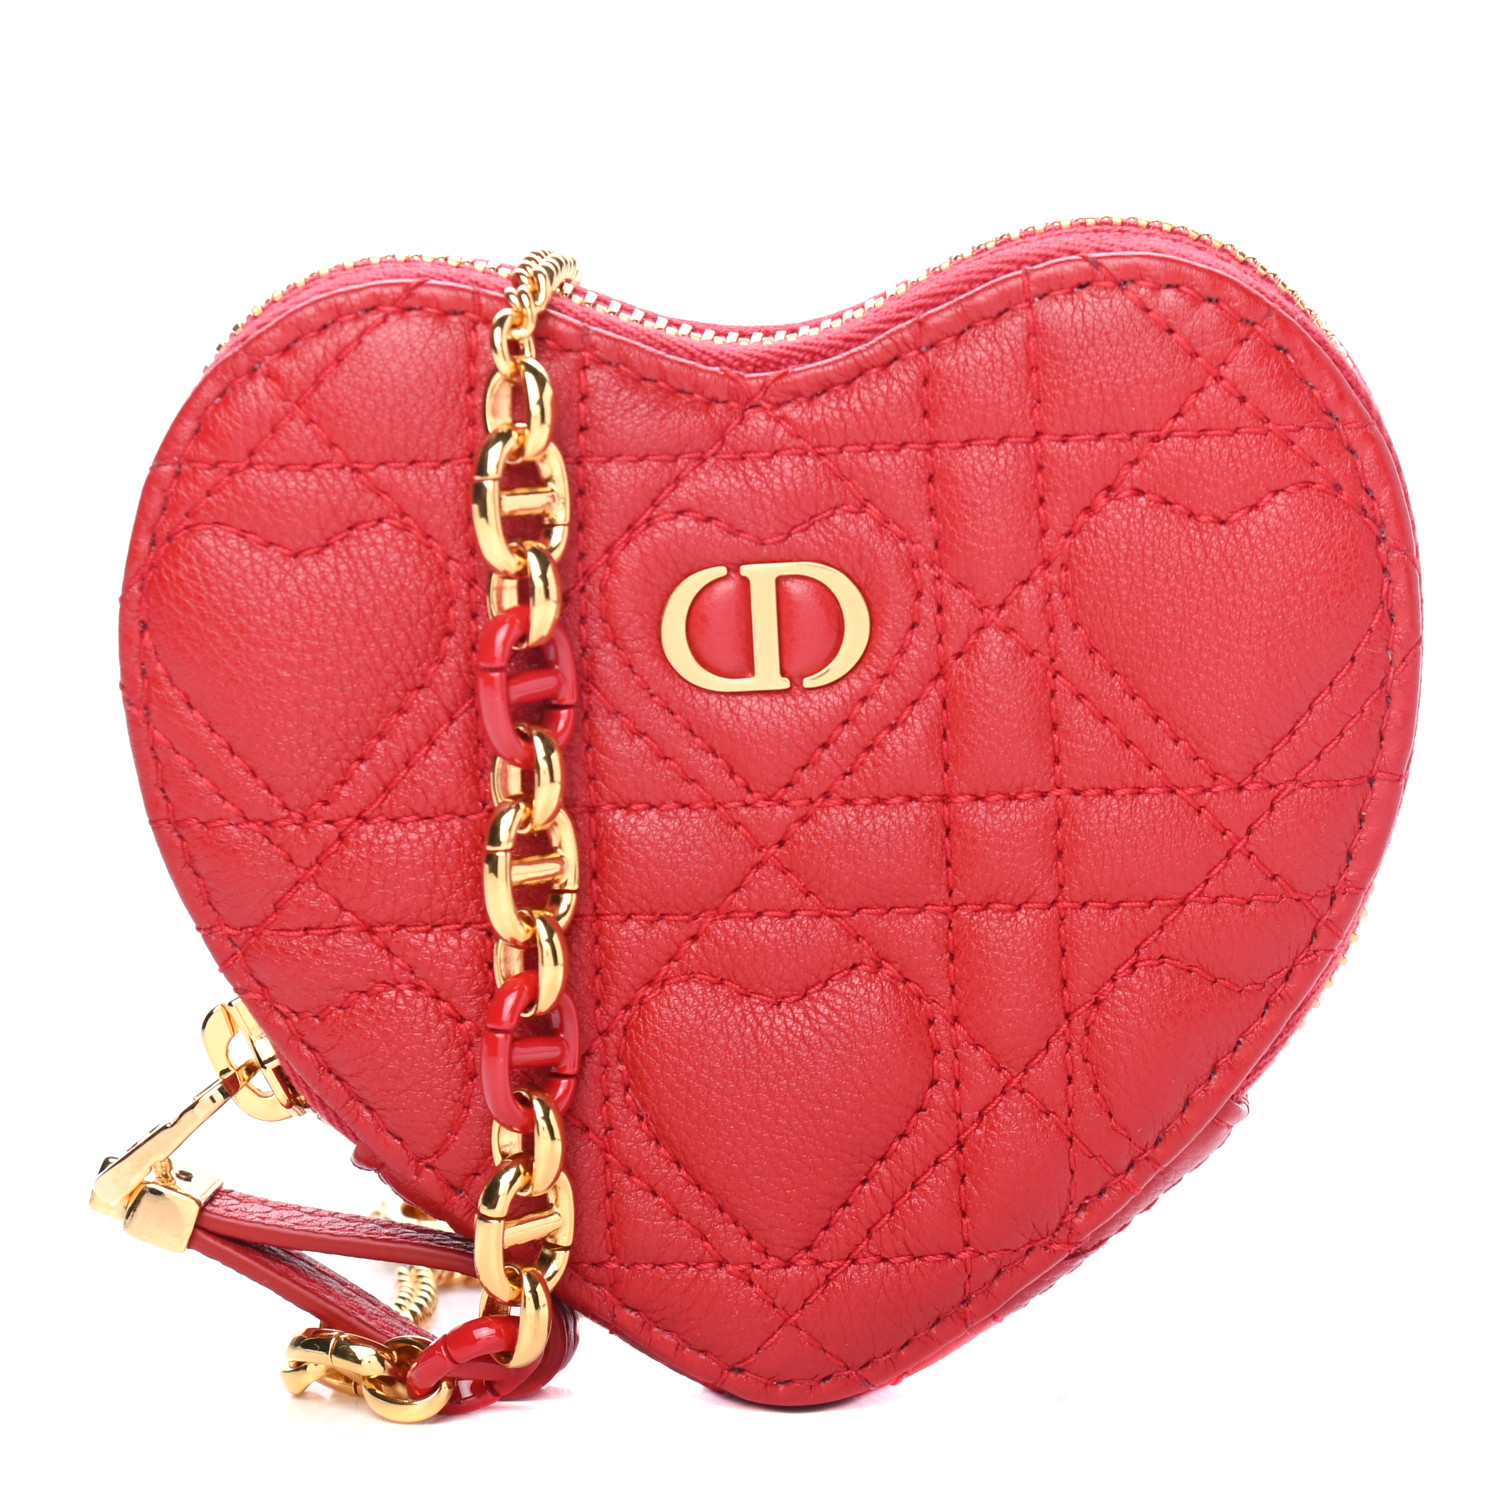 image of CHRISTIAN DIOR Calfskin Cannage Dioramour Caro Heart Pouch With Chain in the color Bright Red by FASHIONPHILE